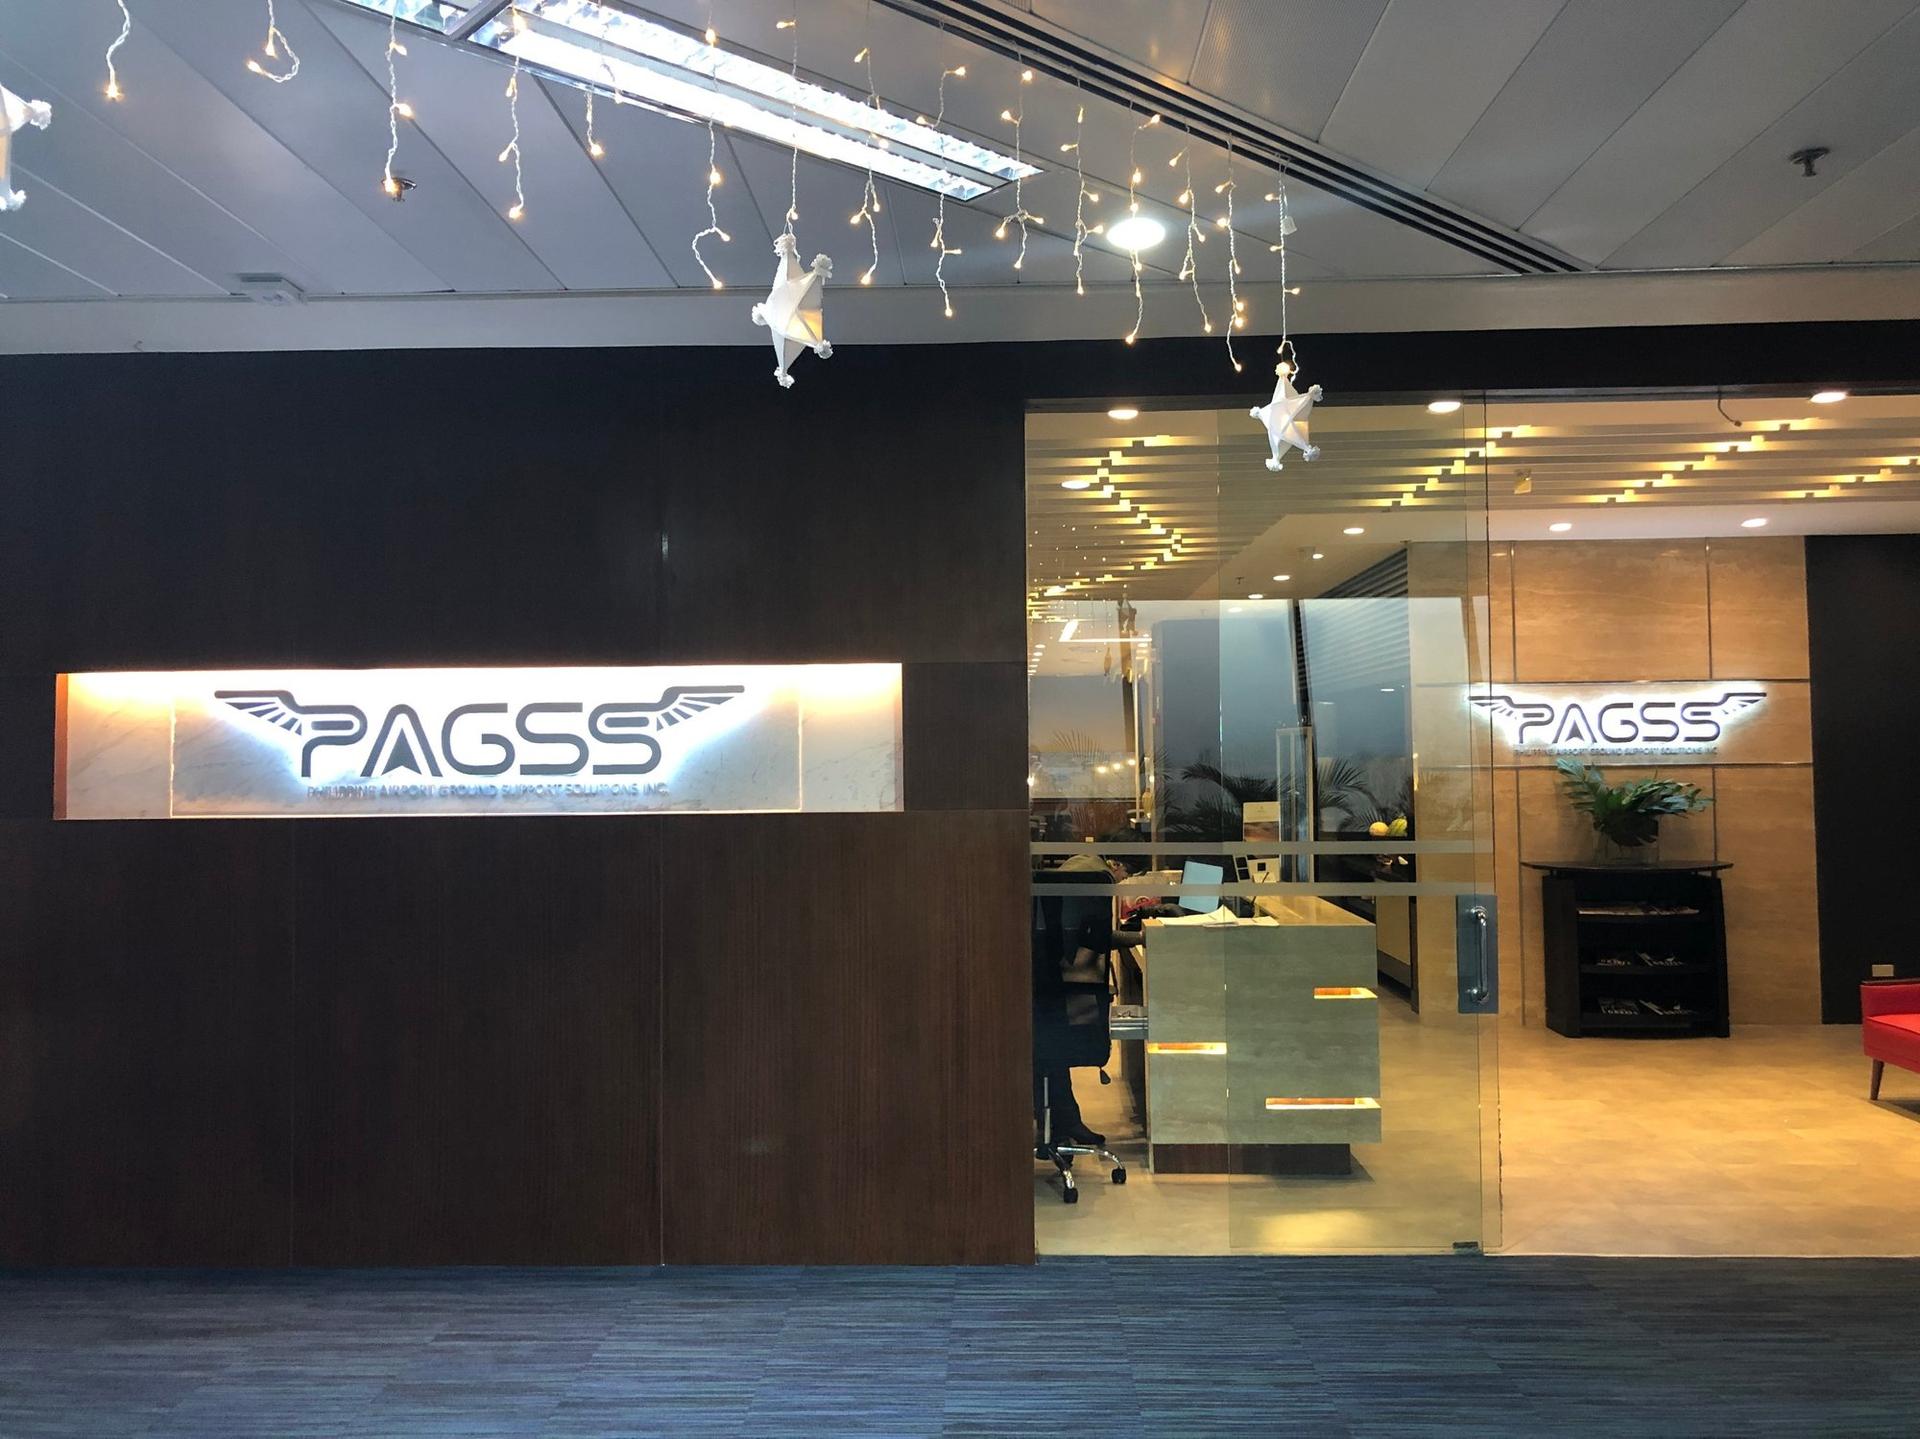 PAGSS Lounge (Gate 7) image 5 of 41